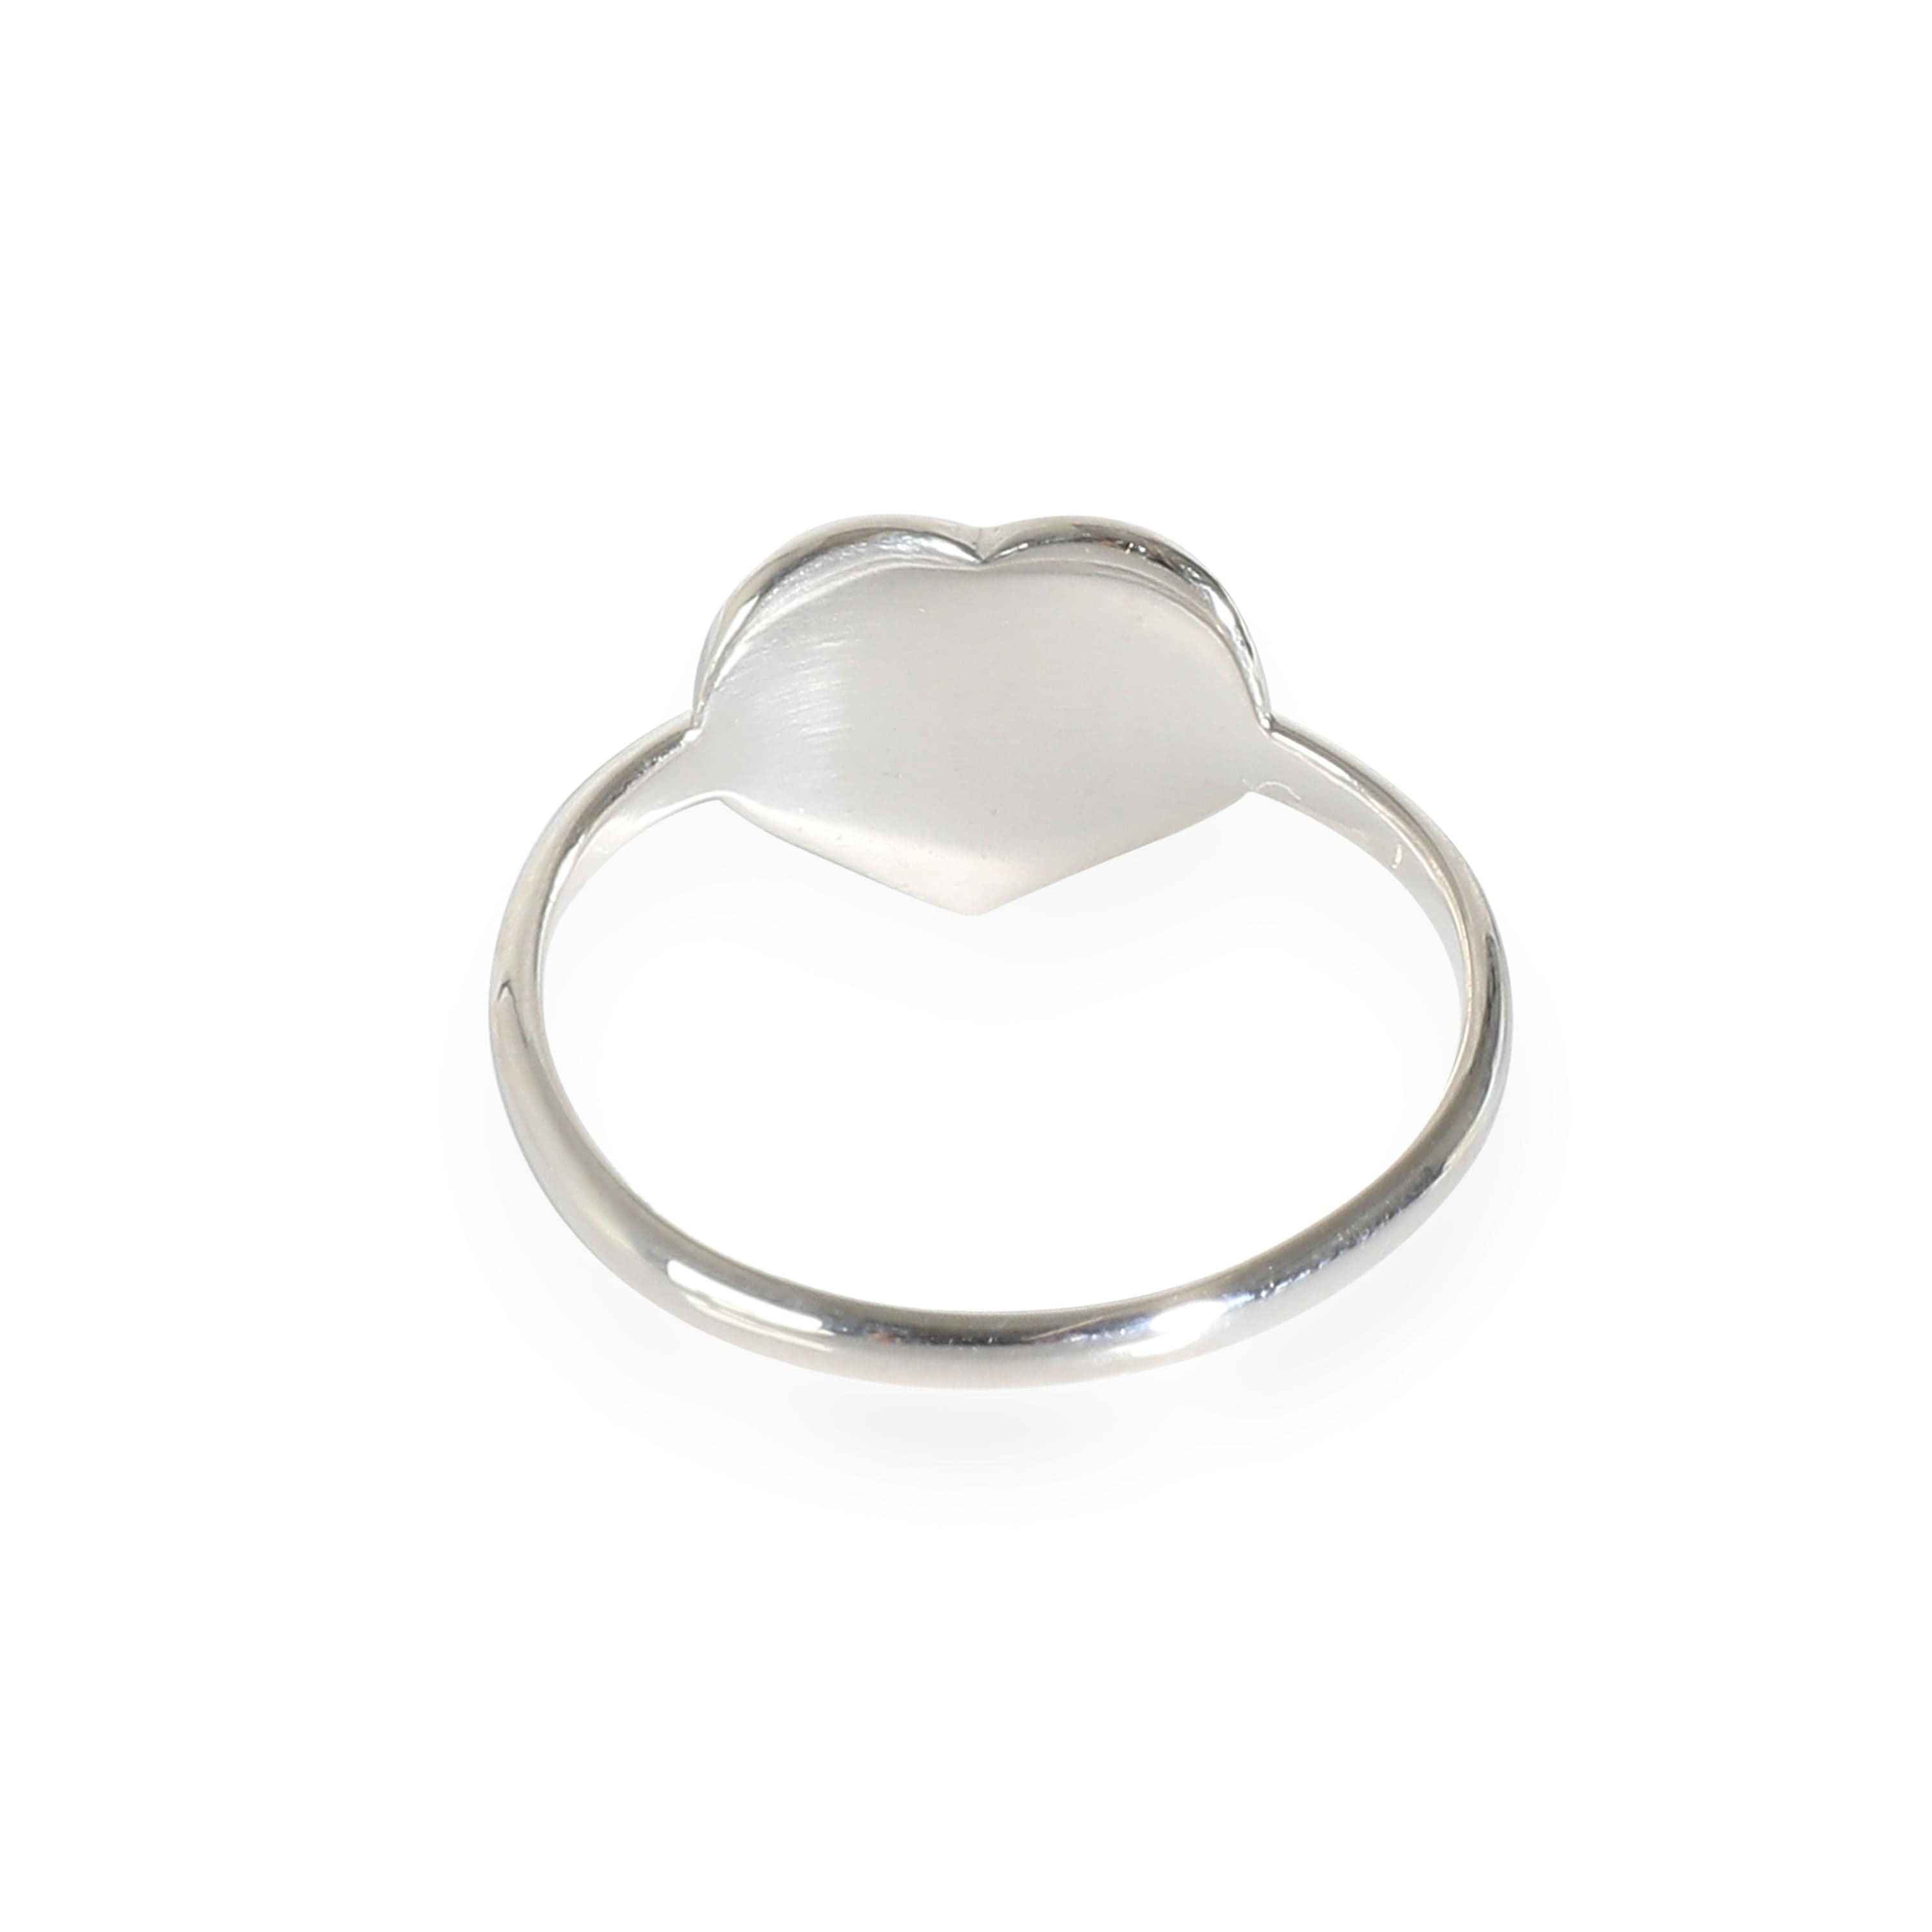 Tiffany & Co. Return to Tiffany Ring in Sterling Silver